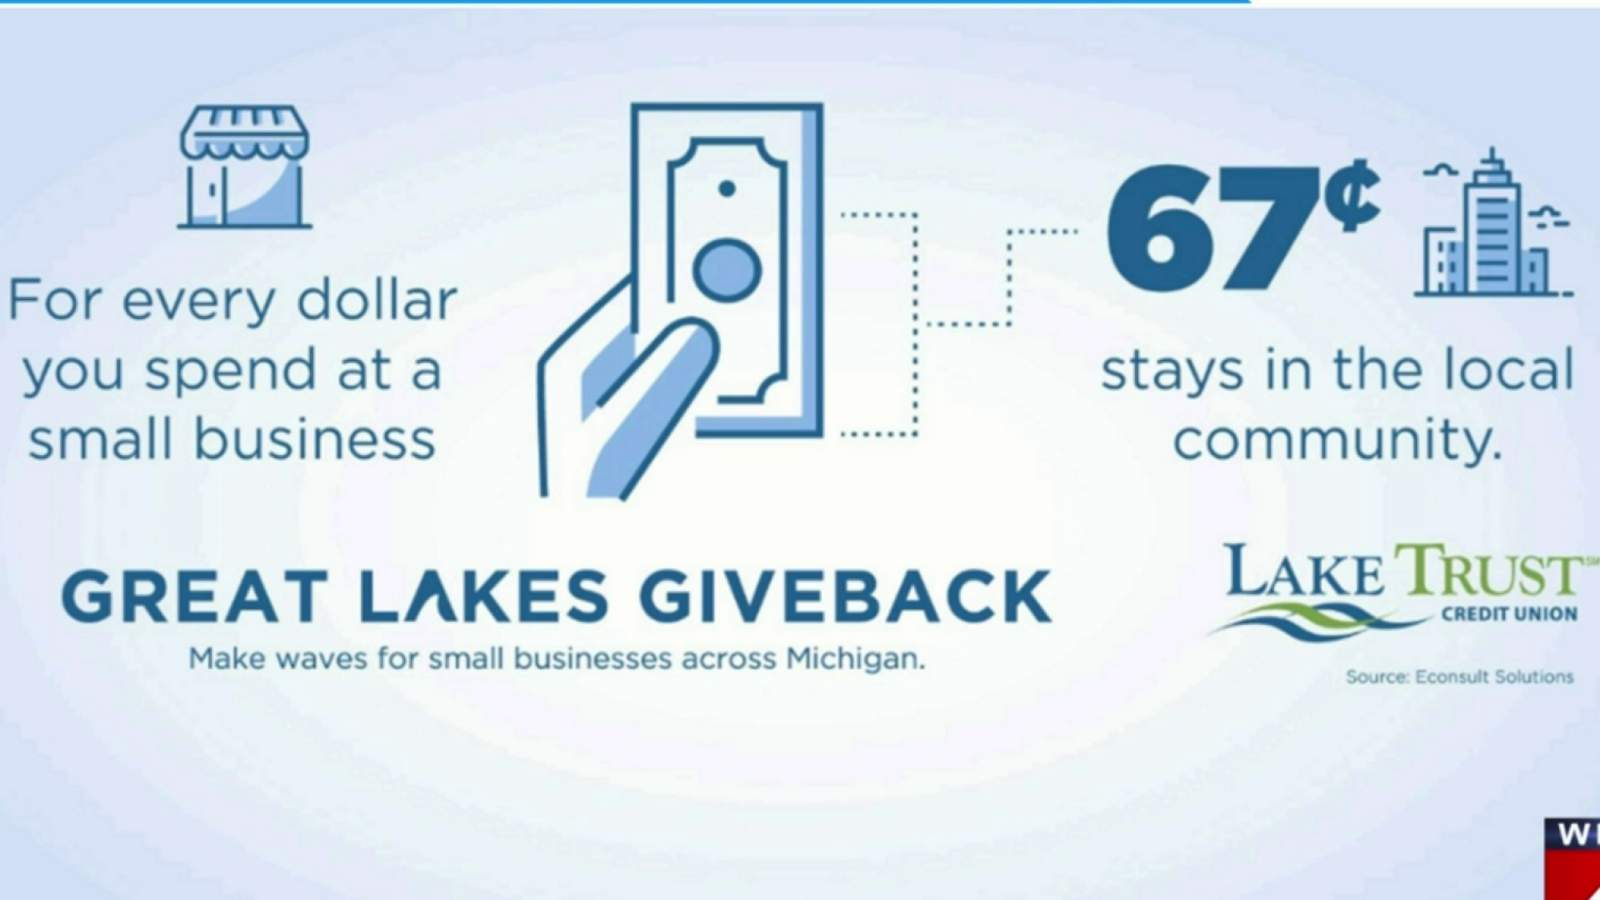 Help local businesses by paying it forward